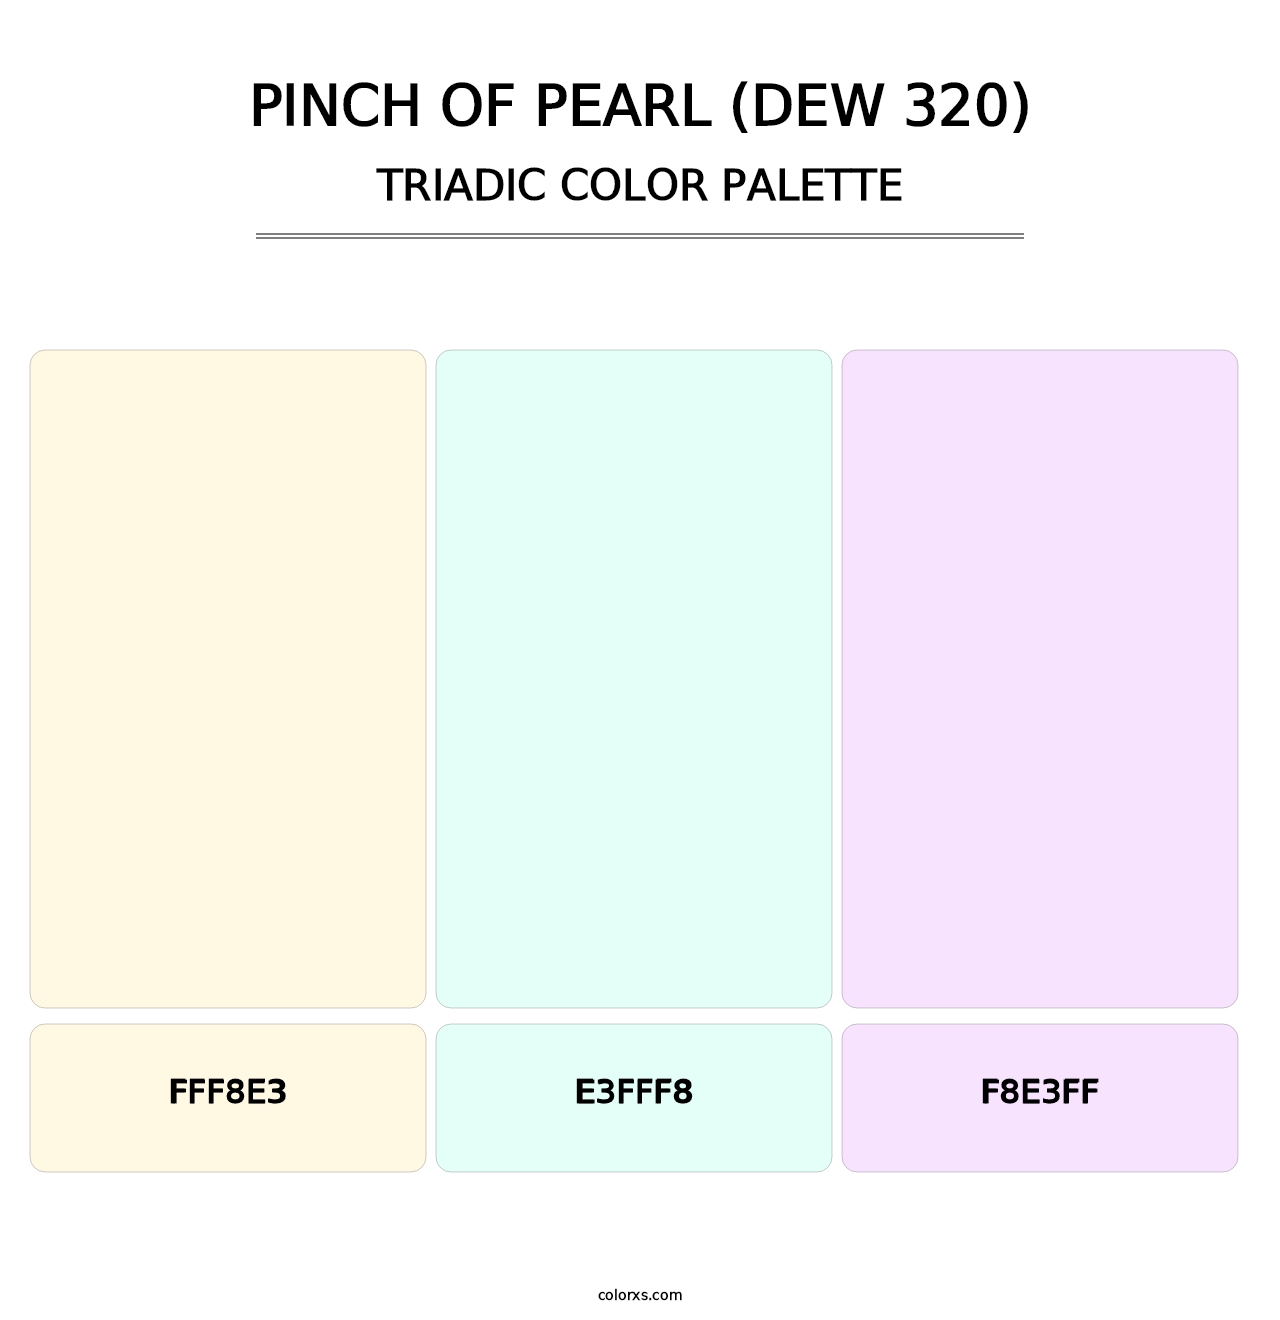 Pinch of Pearl (DEW 320) - Triadic Color Palette